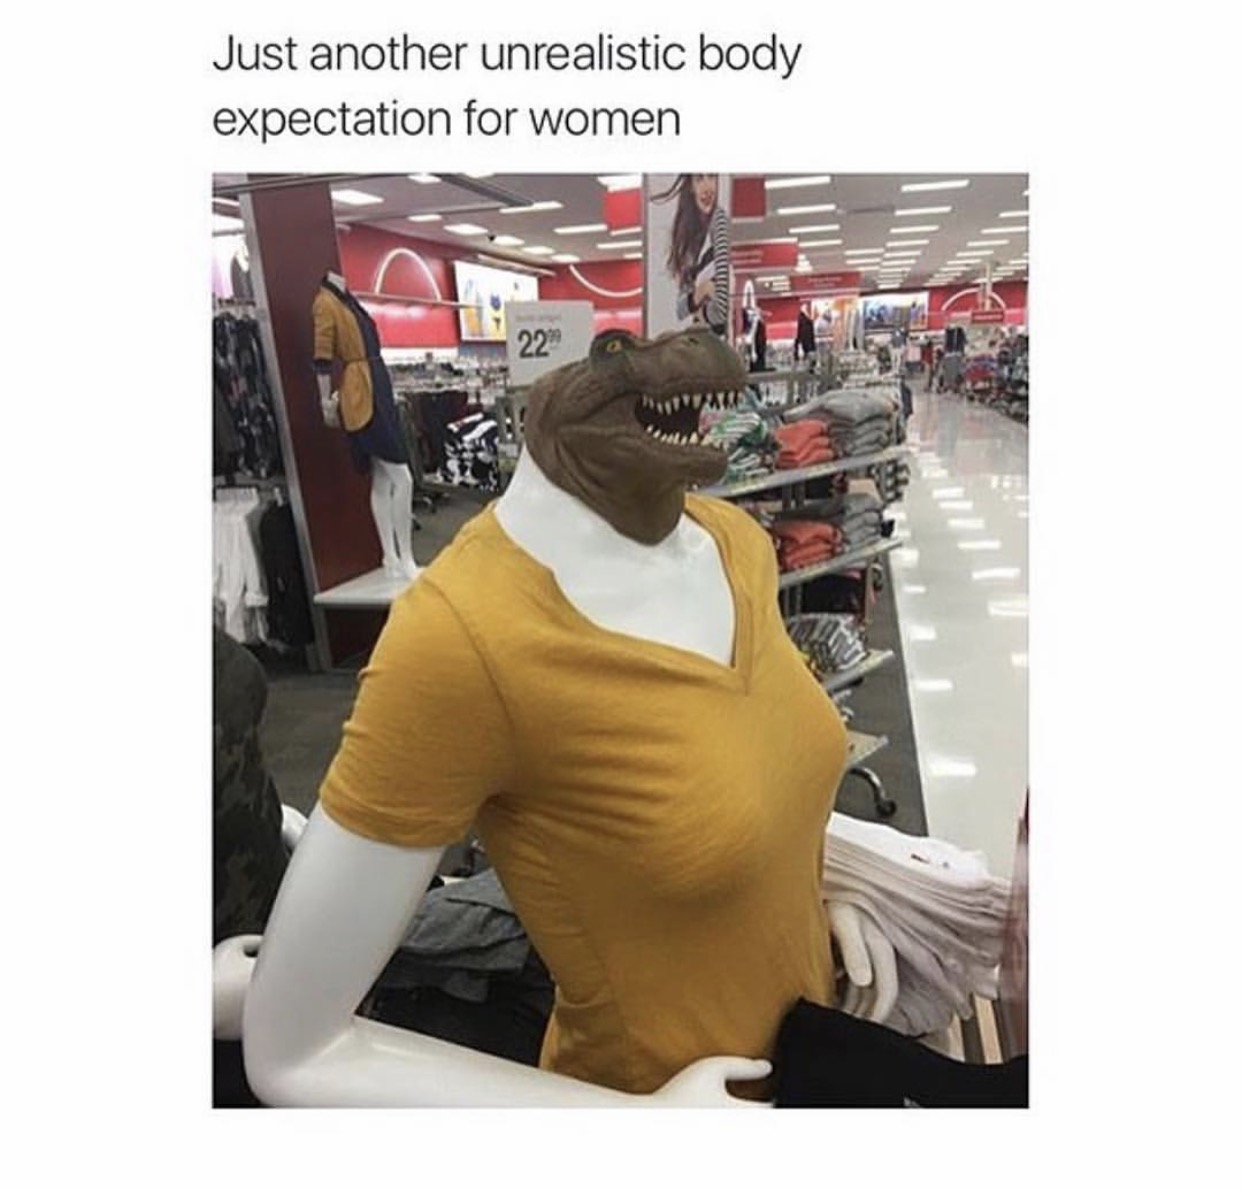 another unrealistic body expectation - Just another unrealistic body expectation for women